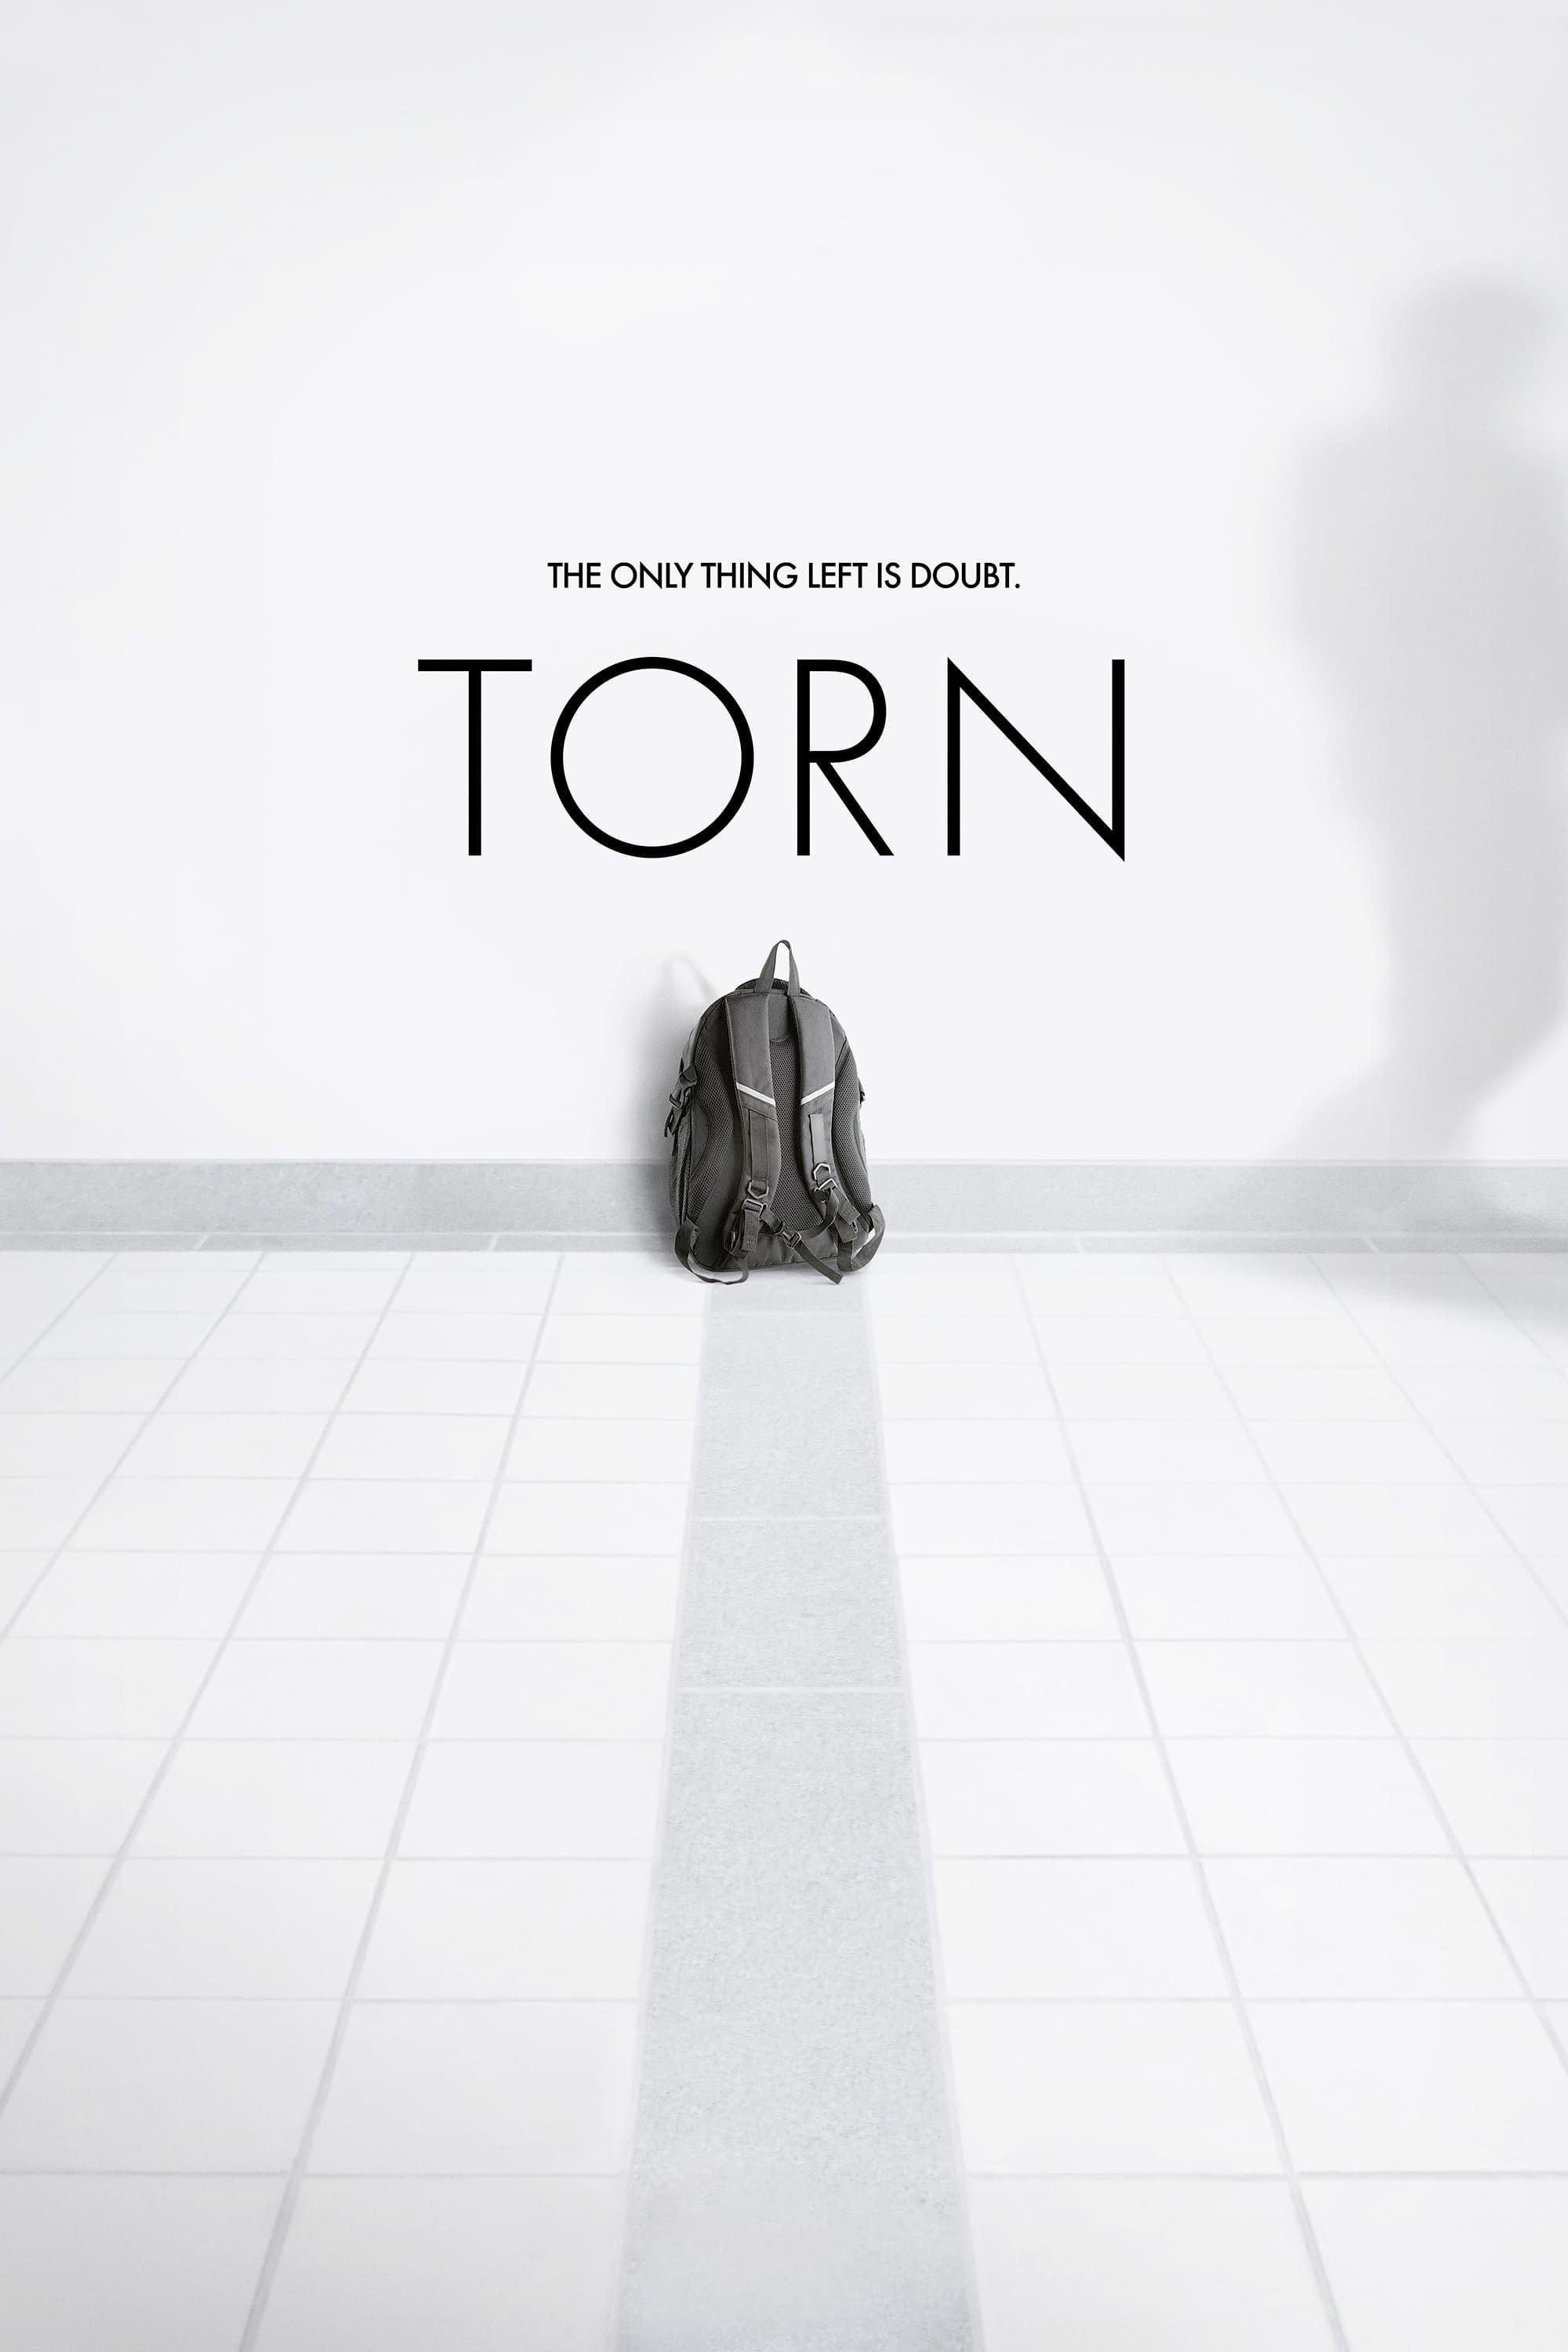 Torn poster